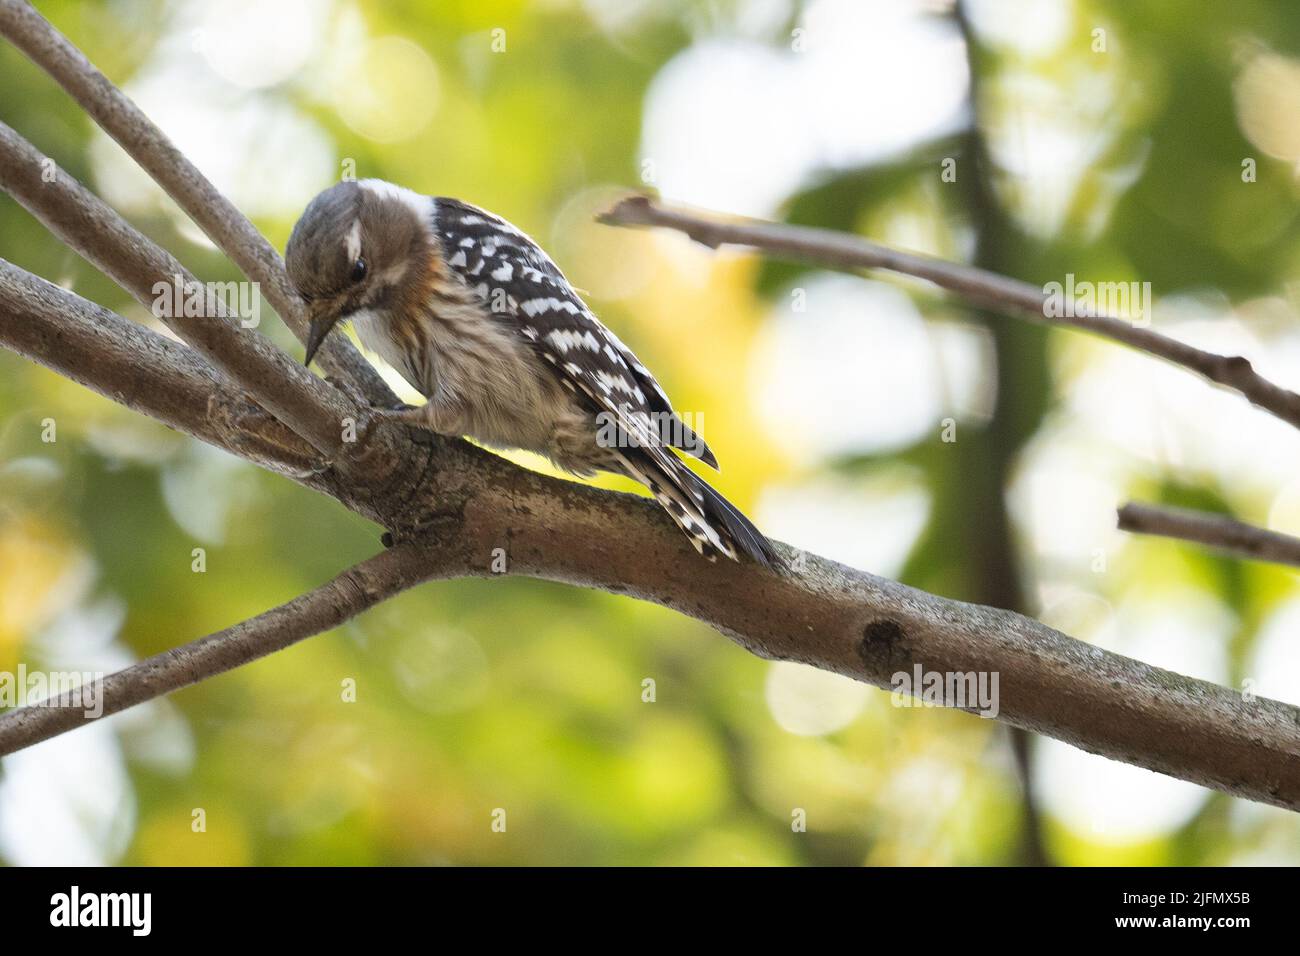 A closeup portrait of a beautiful Japanese pygmy woodpecker sitting on a branch on blurry background Stock Photo